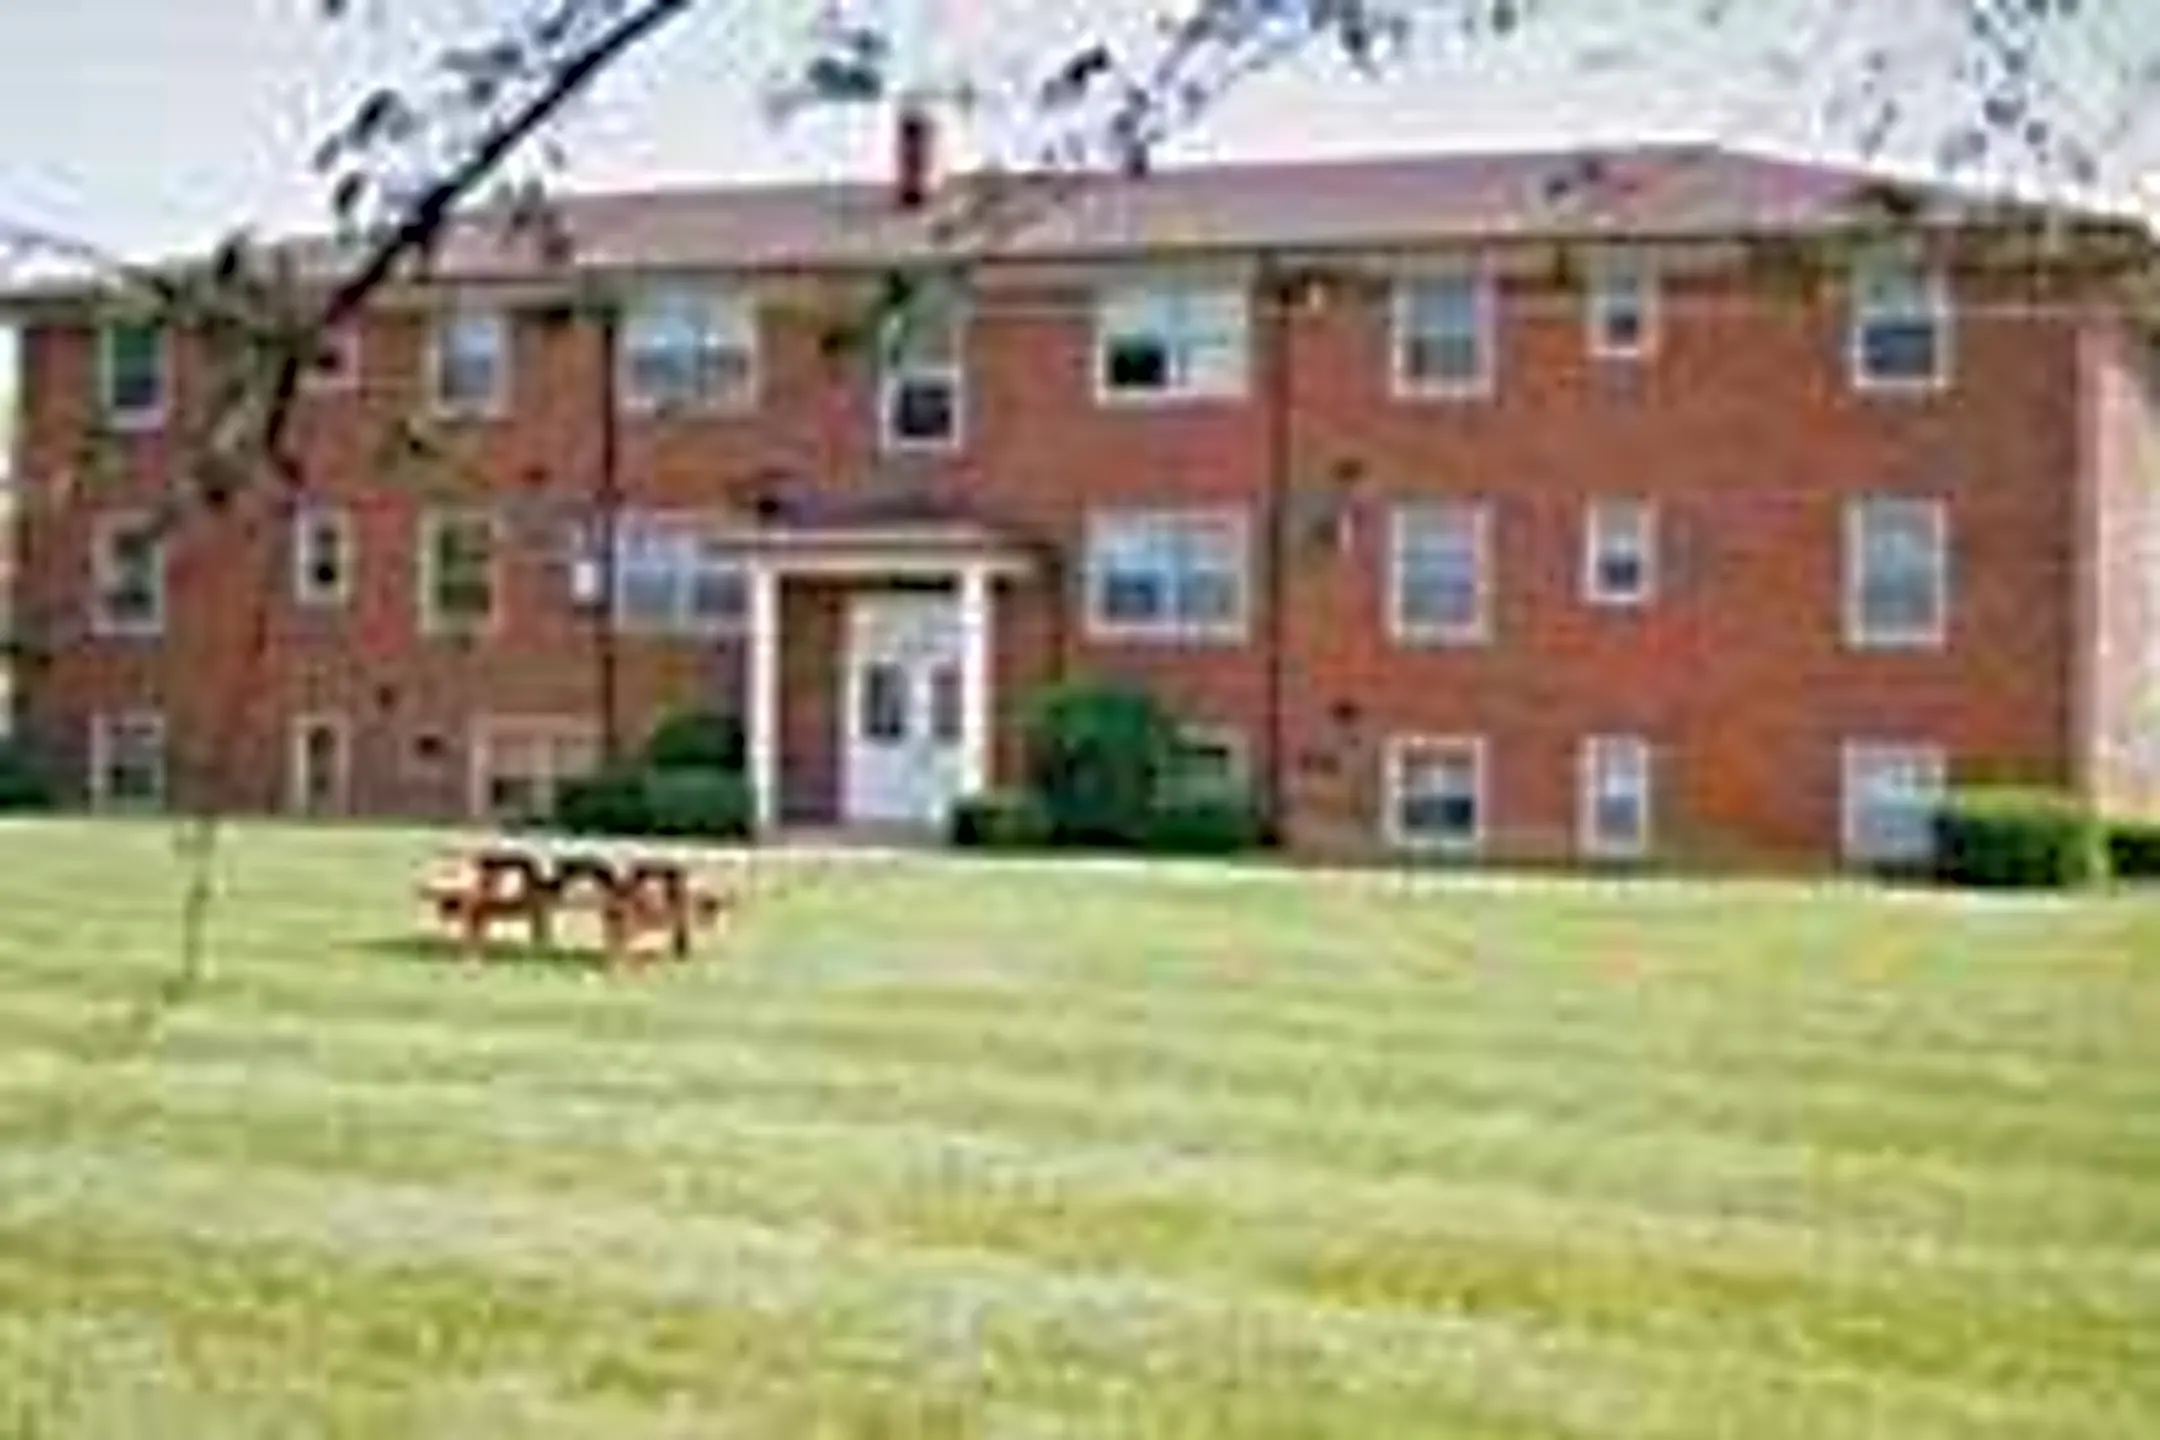 Building - Rosedale Hills Apartments - Indianapolis, IN